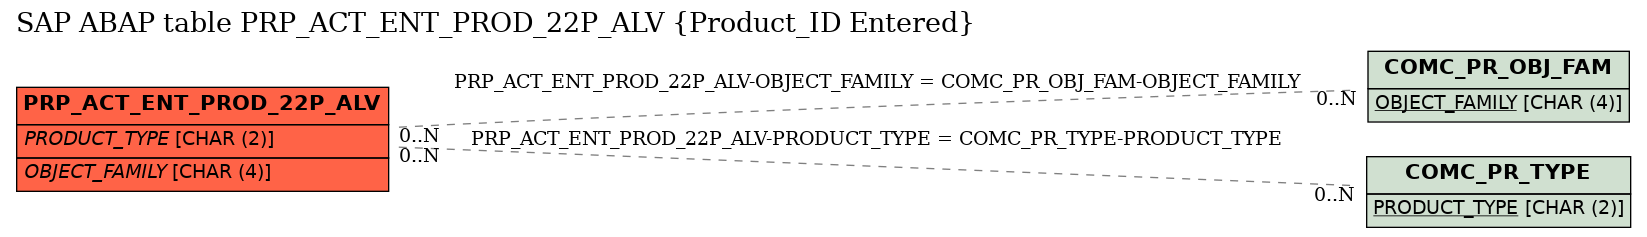 E-R Diagram for table PRP_ACT_ENT_PROD_22P_ALV (Product_ID Entered)